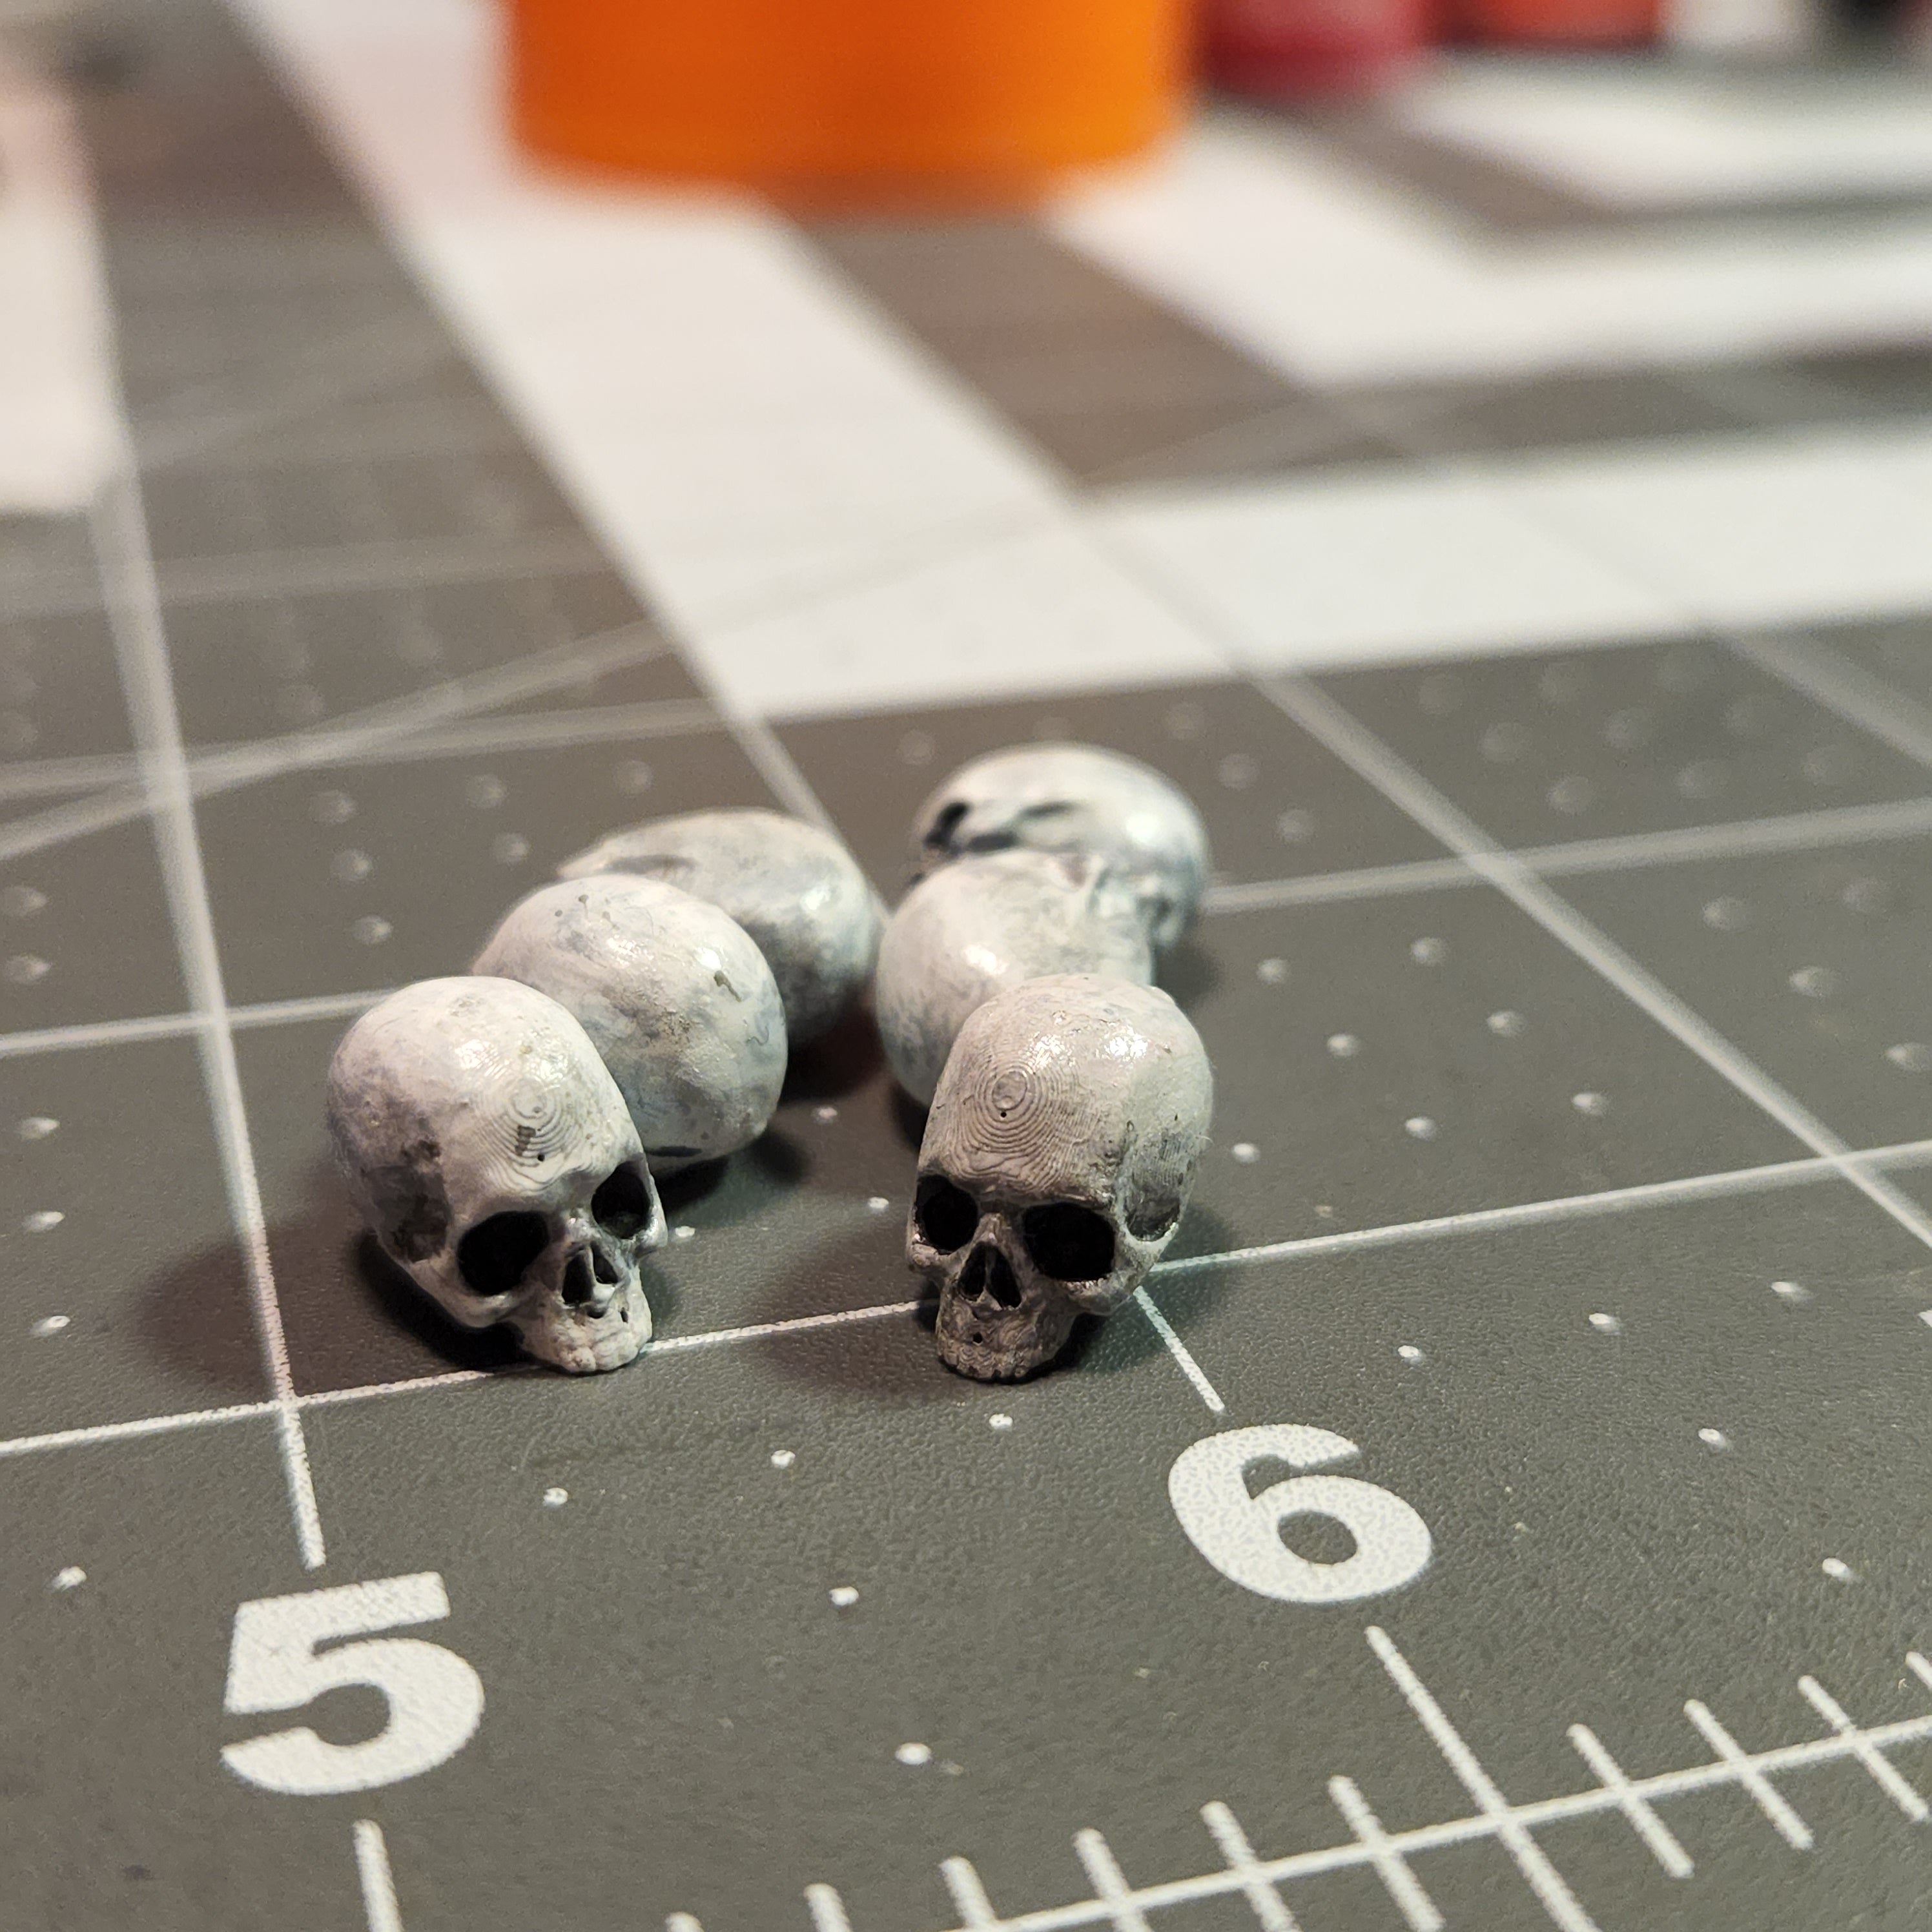 3D Printed mini skulls for inclusions in dice. Painted to look like skulls